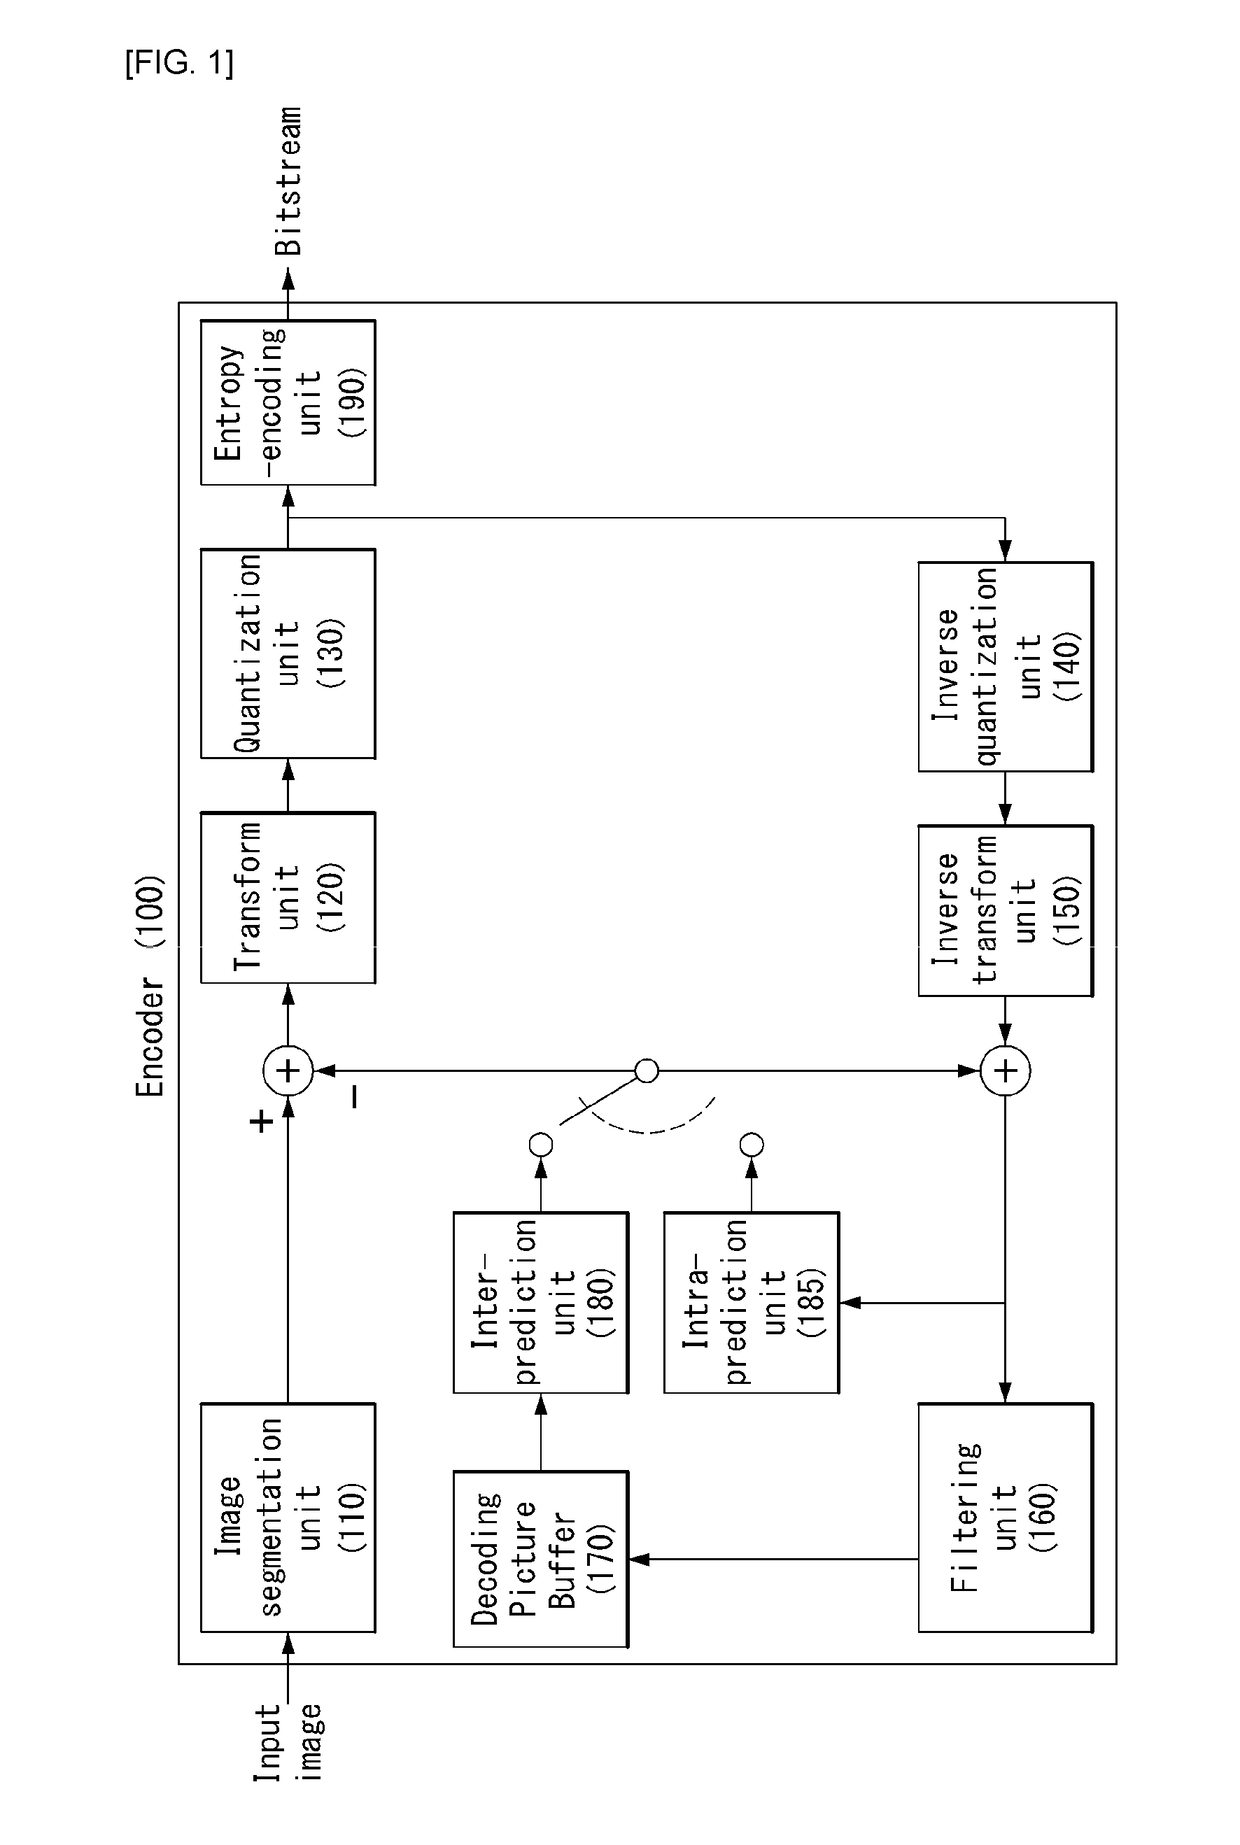 Method and apparatus for encoding/decoding a video signal